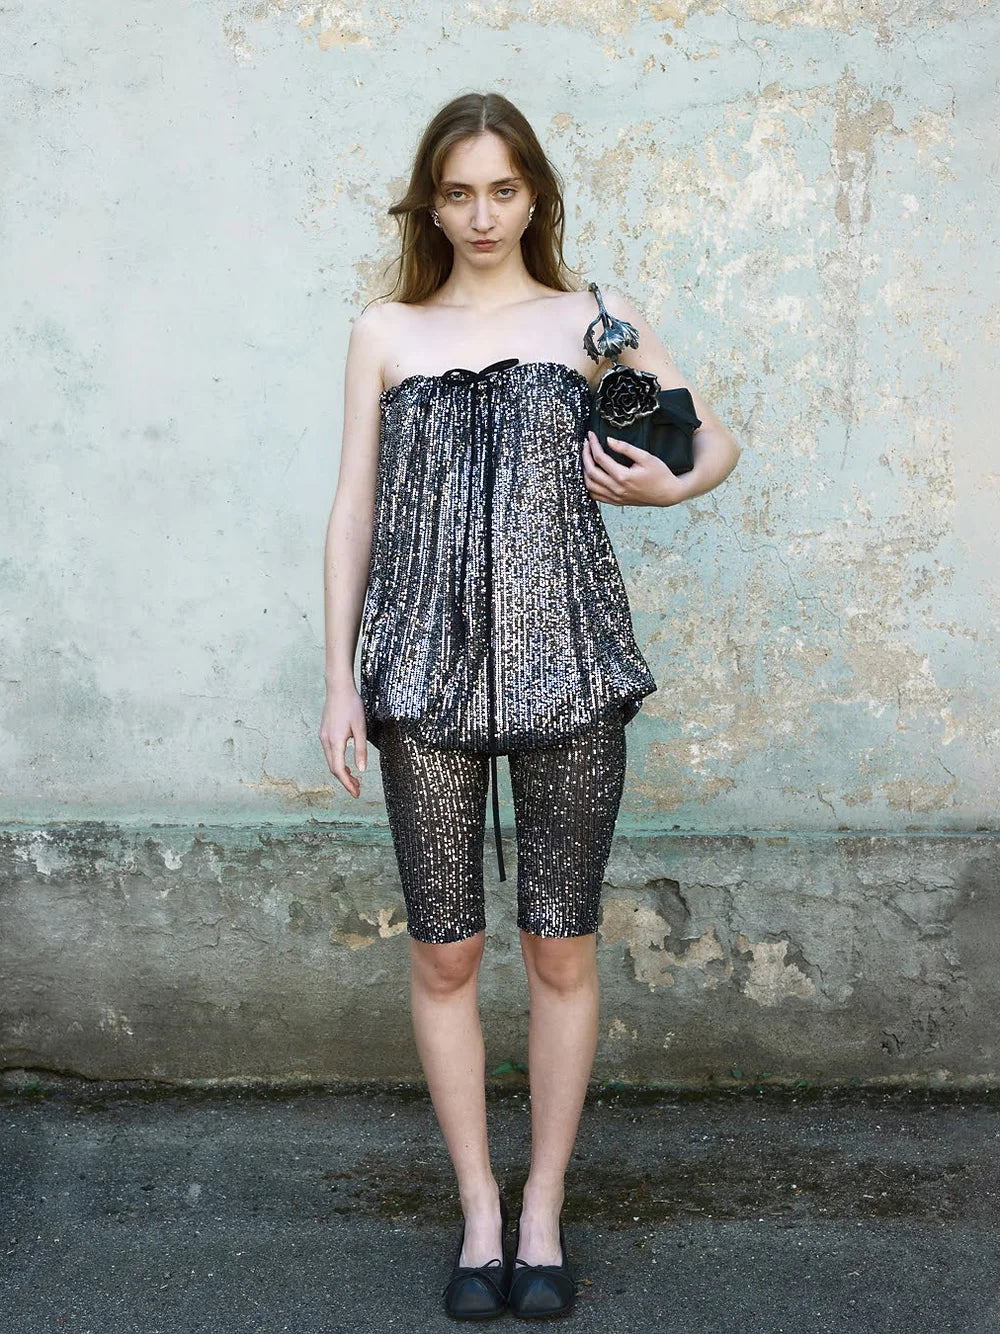 SS24 Bubble Dress/skirt In Sequin